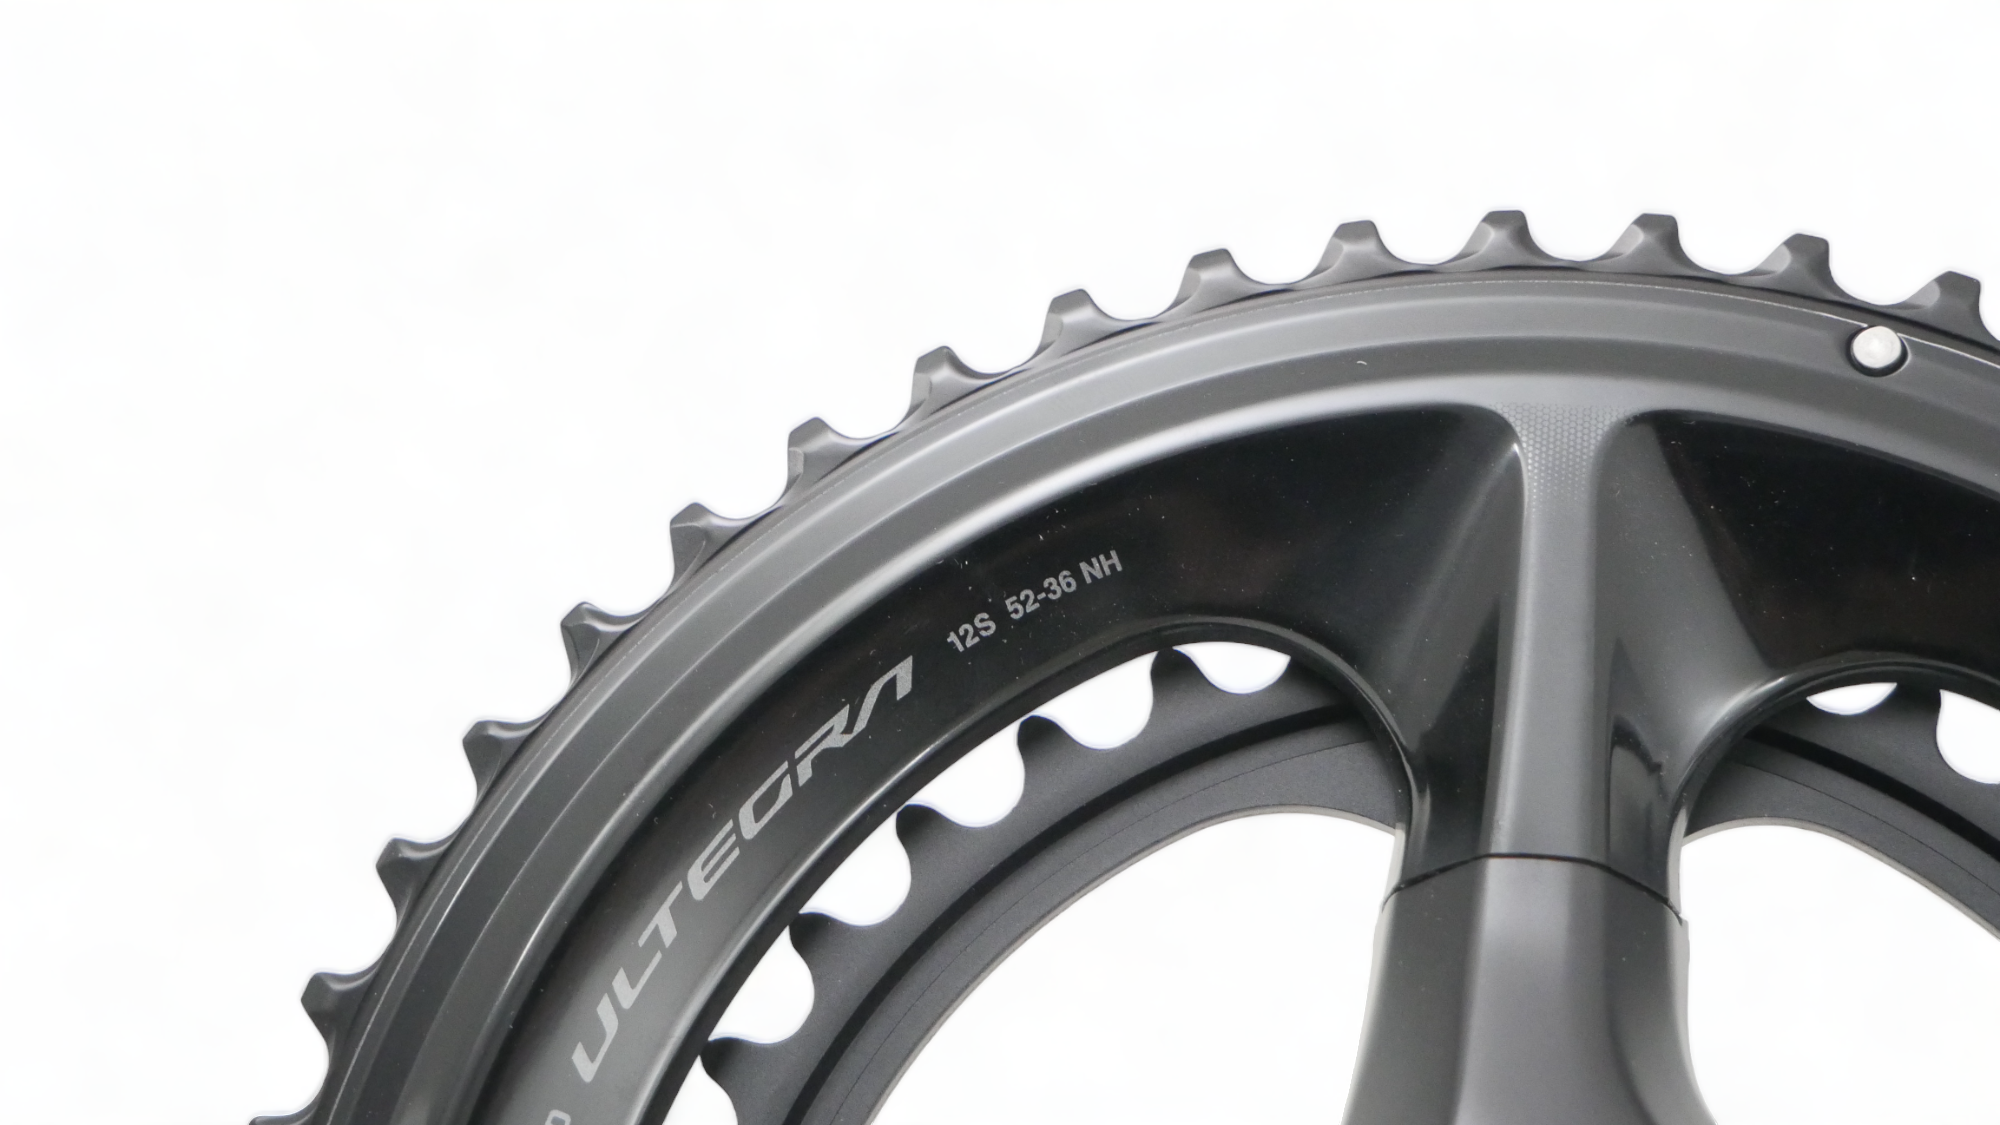 [Reconditionné] Pedalier Shimano Ultegra FC-R8100 Stage Power